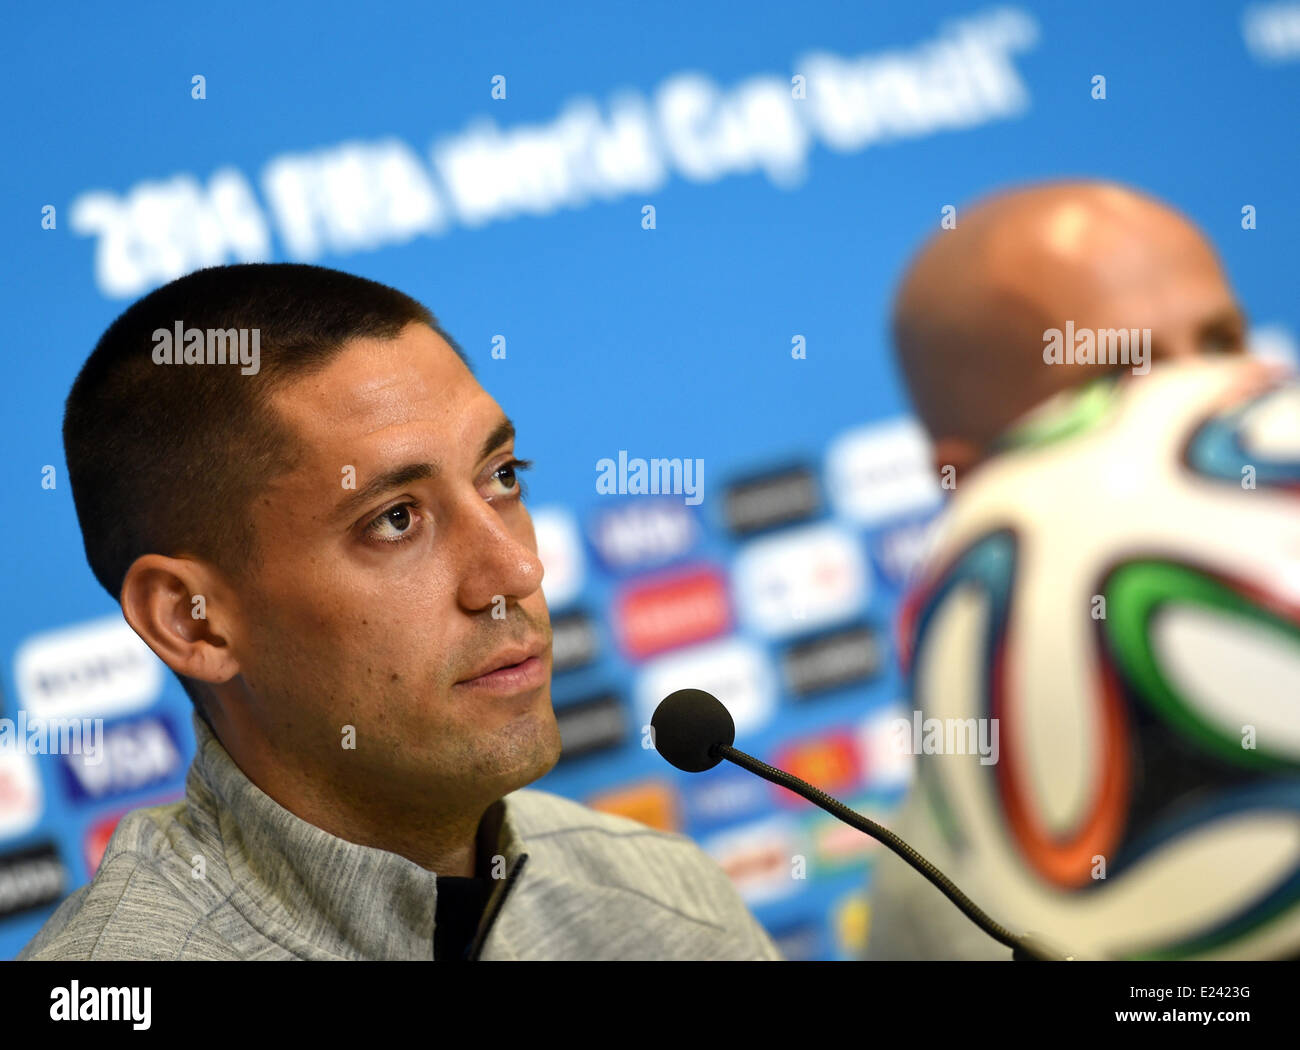 Natal, Brazil. 15th June, 2014. Clint Dempsey seen during a press conference of USA's national soccer team at the Arena das Dunas Stadium in Natal, Brazil, 15 June 2014. Ghana will face USA in their group G preliminary round match at the FIFA World Cup 2014 on 16 June 2014 in Natal. Photo: Marius Becker/dpa/Alamy Live News Stock Photo